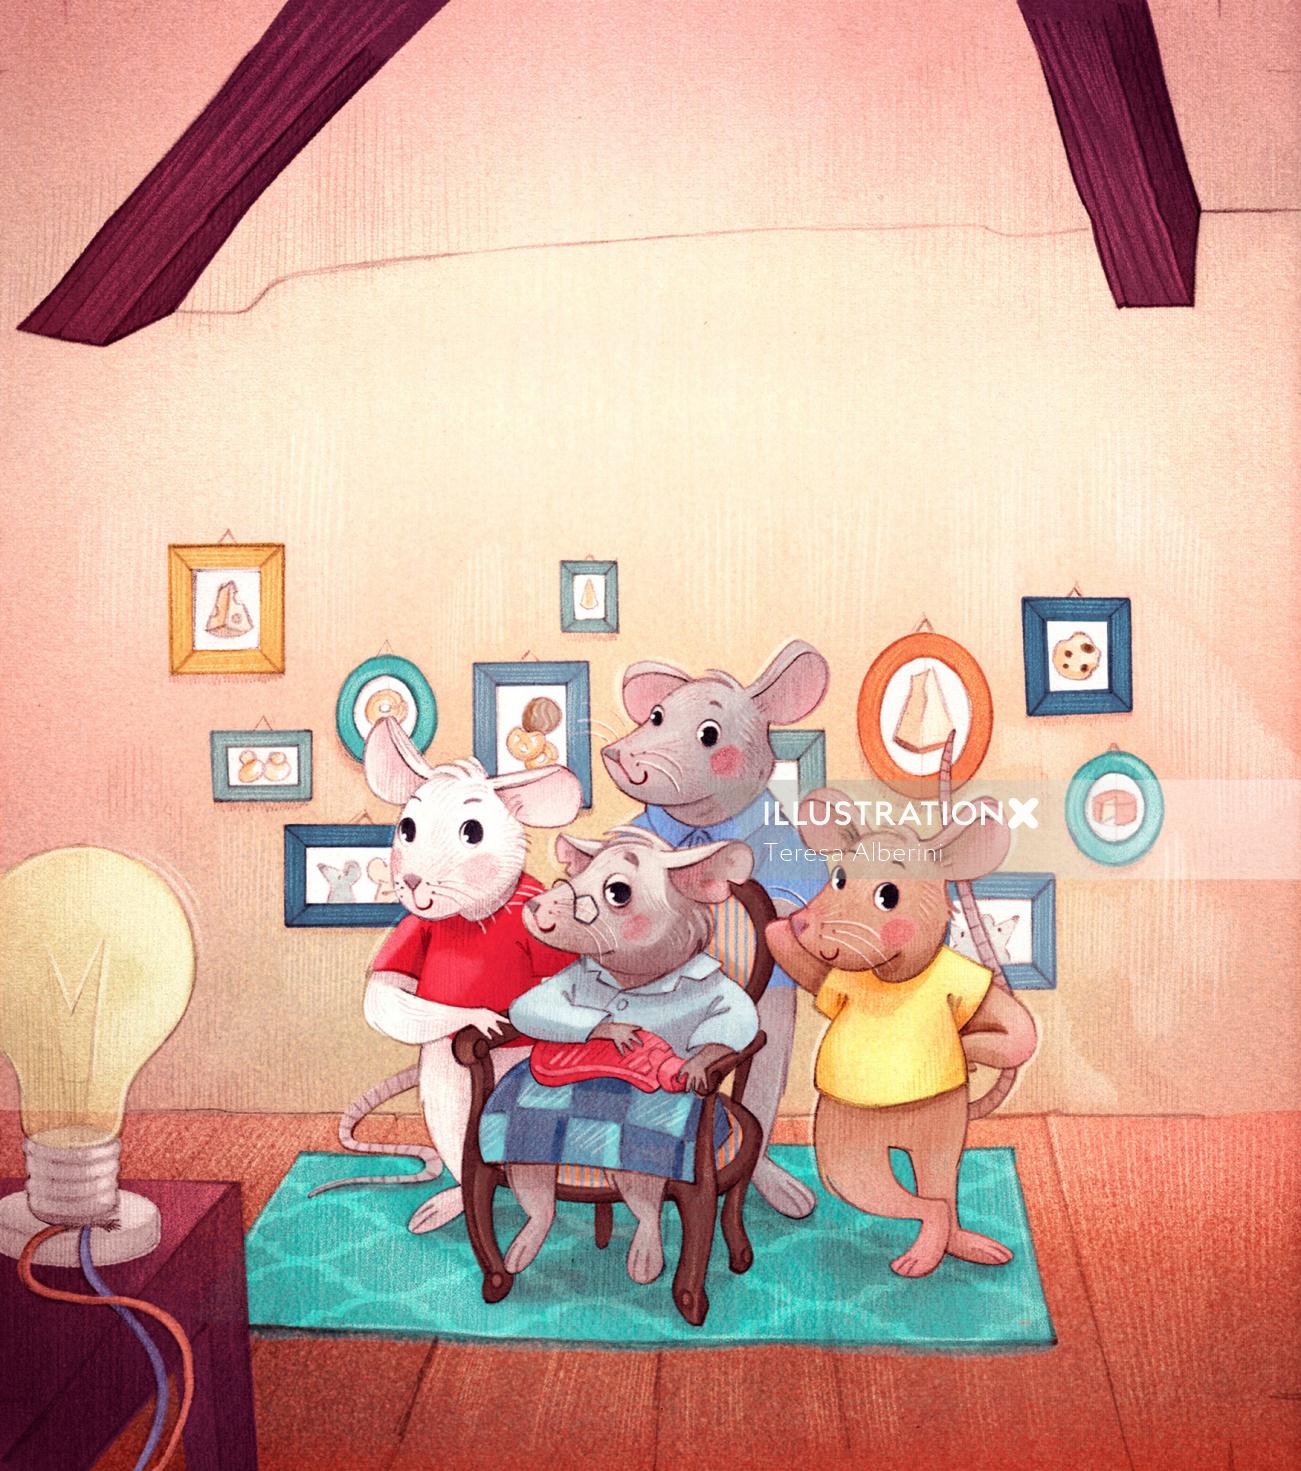 The Mouse's Legacy book's front cover design